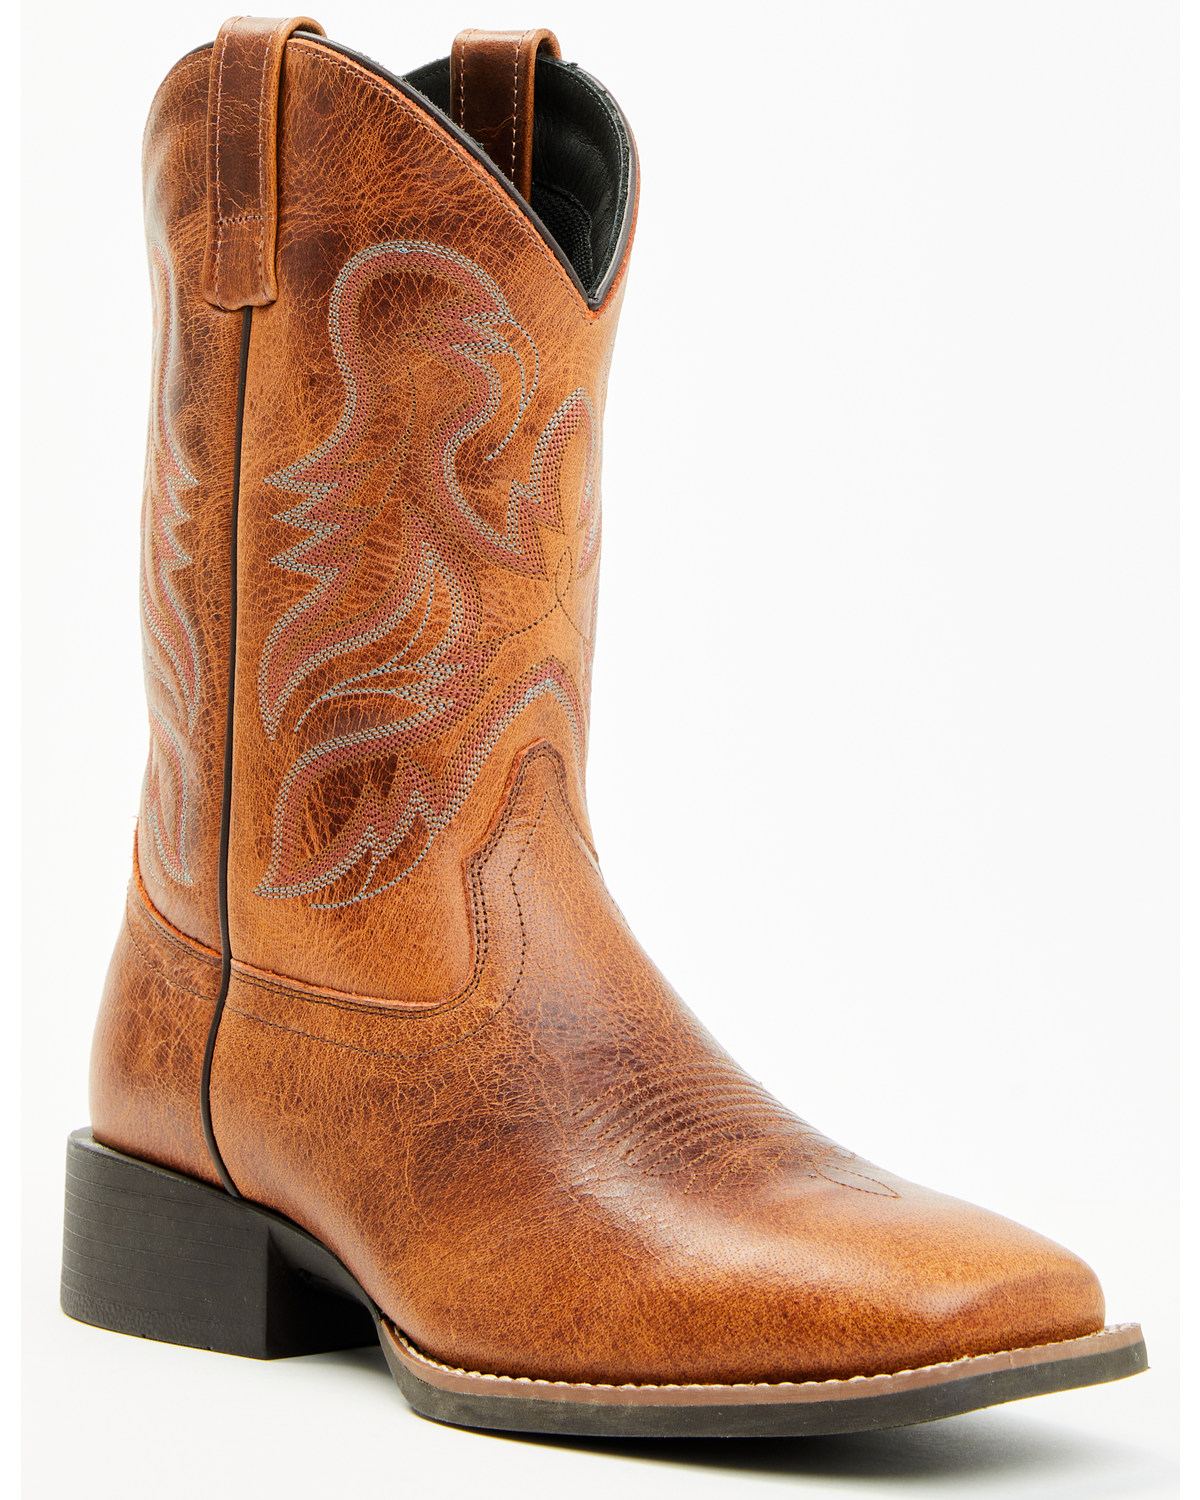 Cody James Men's Ace Performance Western Boots - Broad Square Toe